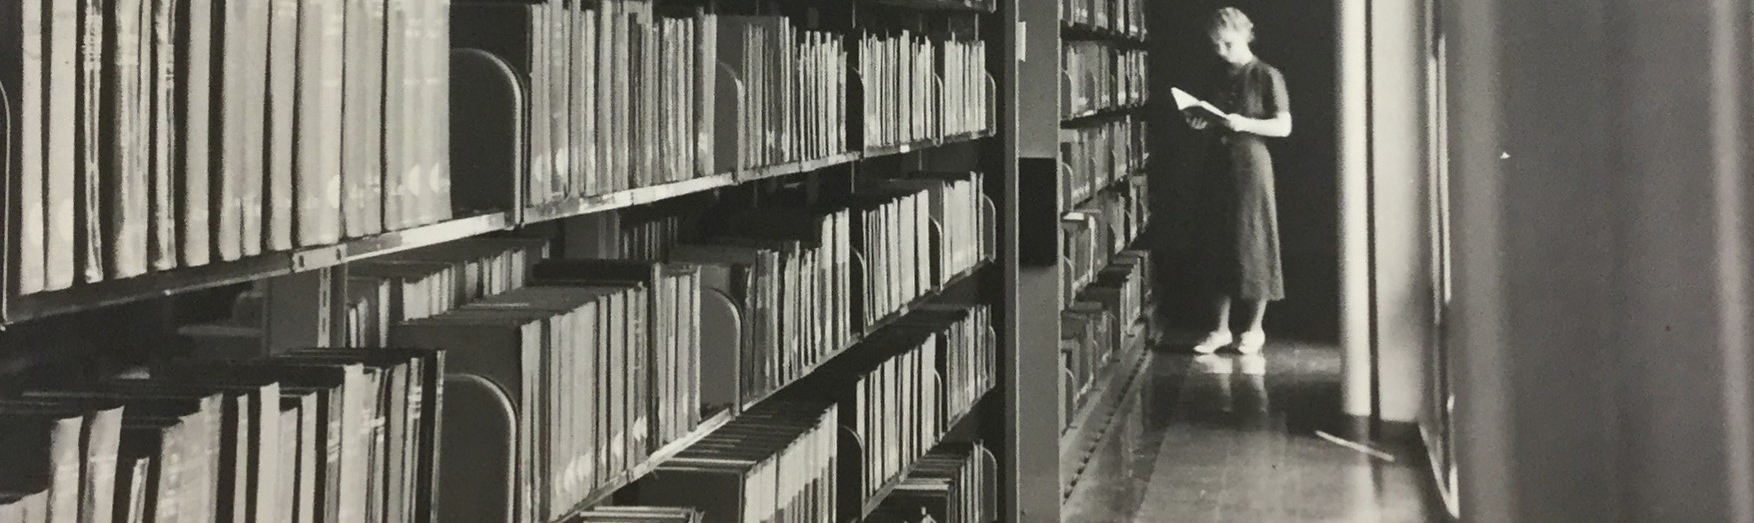 Lady looking through a book, with bookshelves in the foreground. Circa 1950.